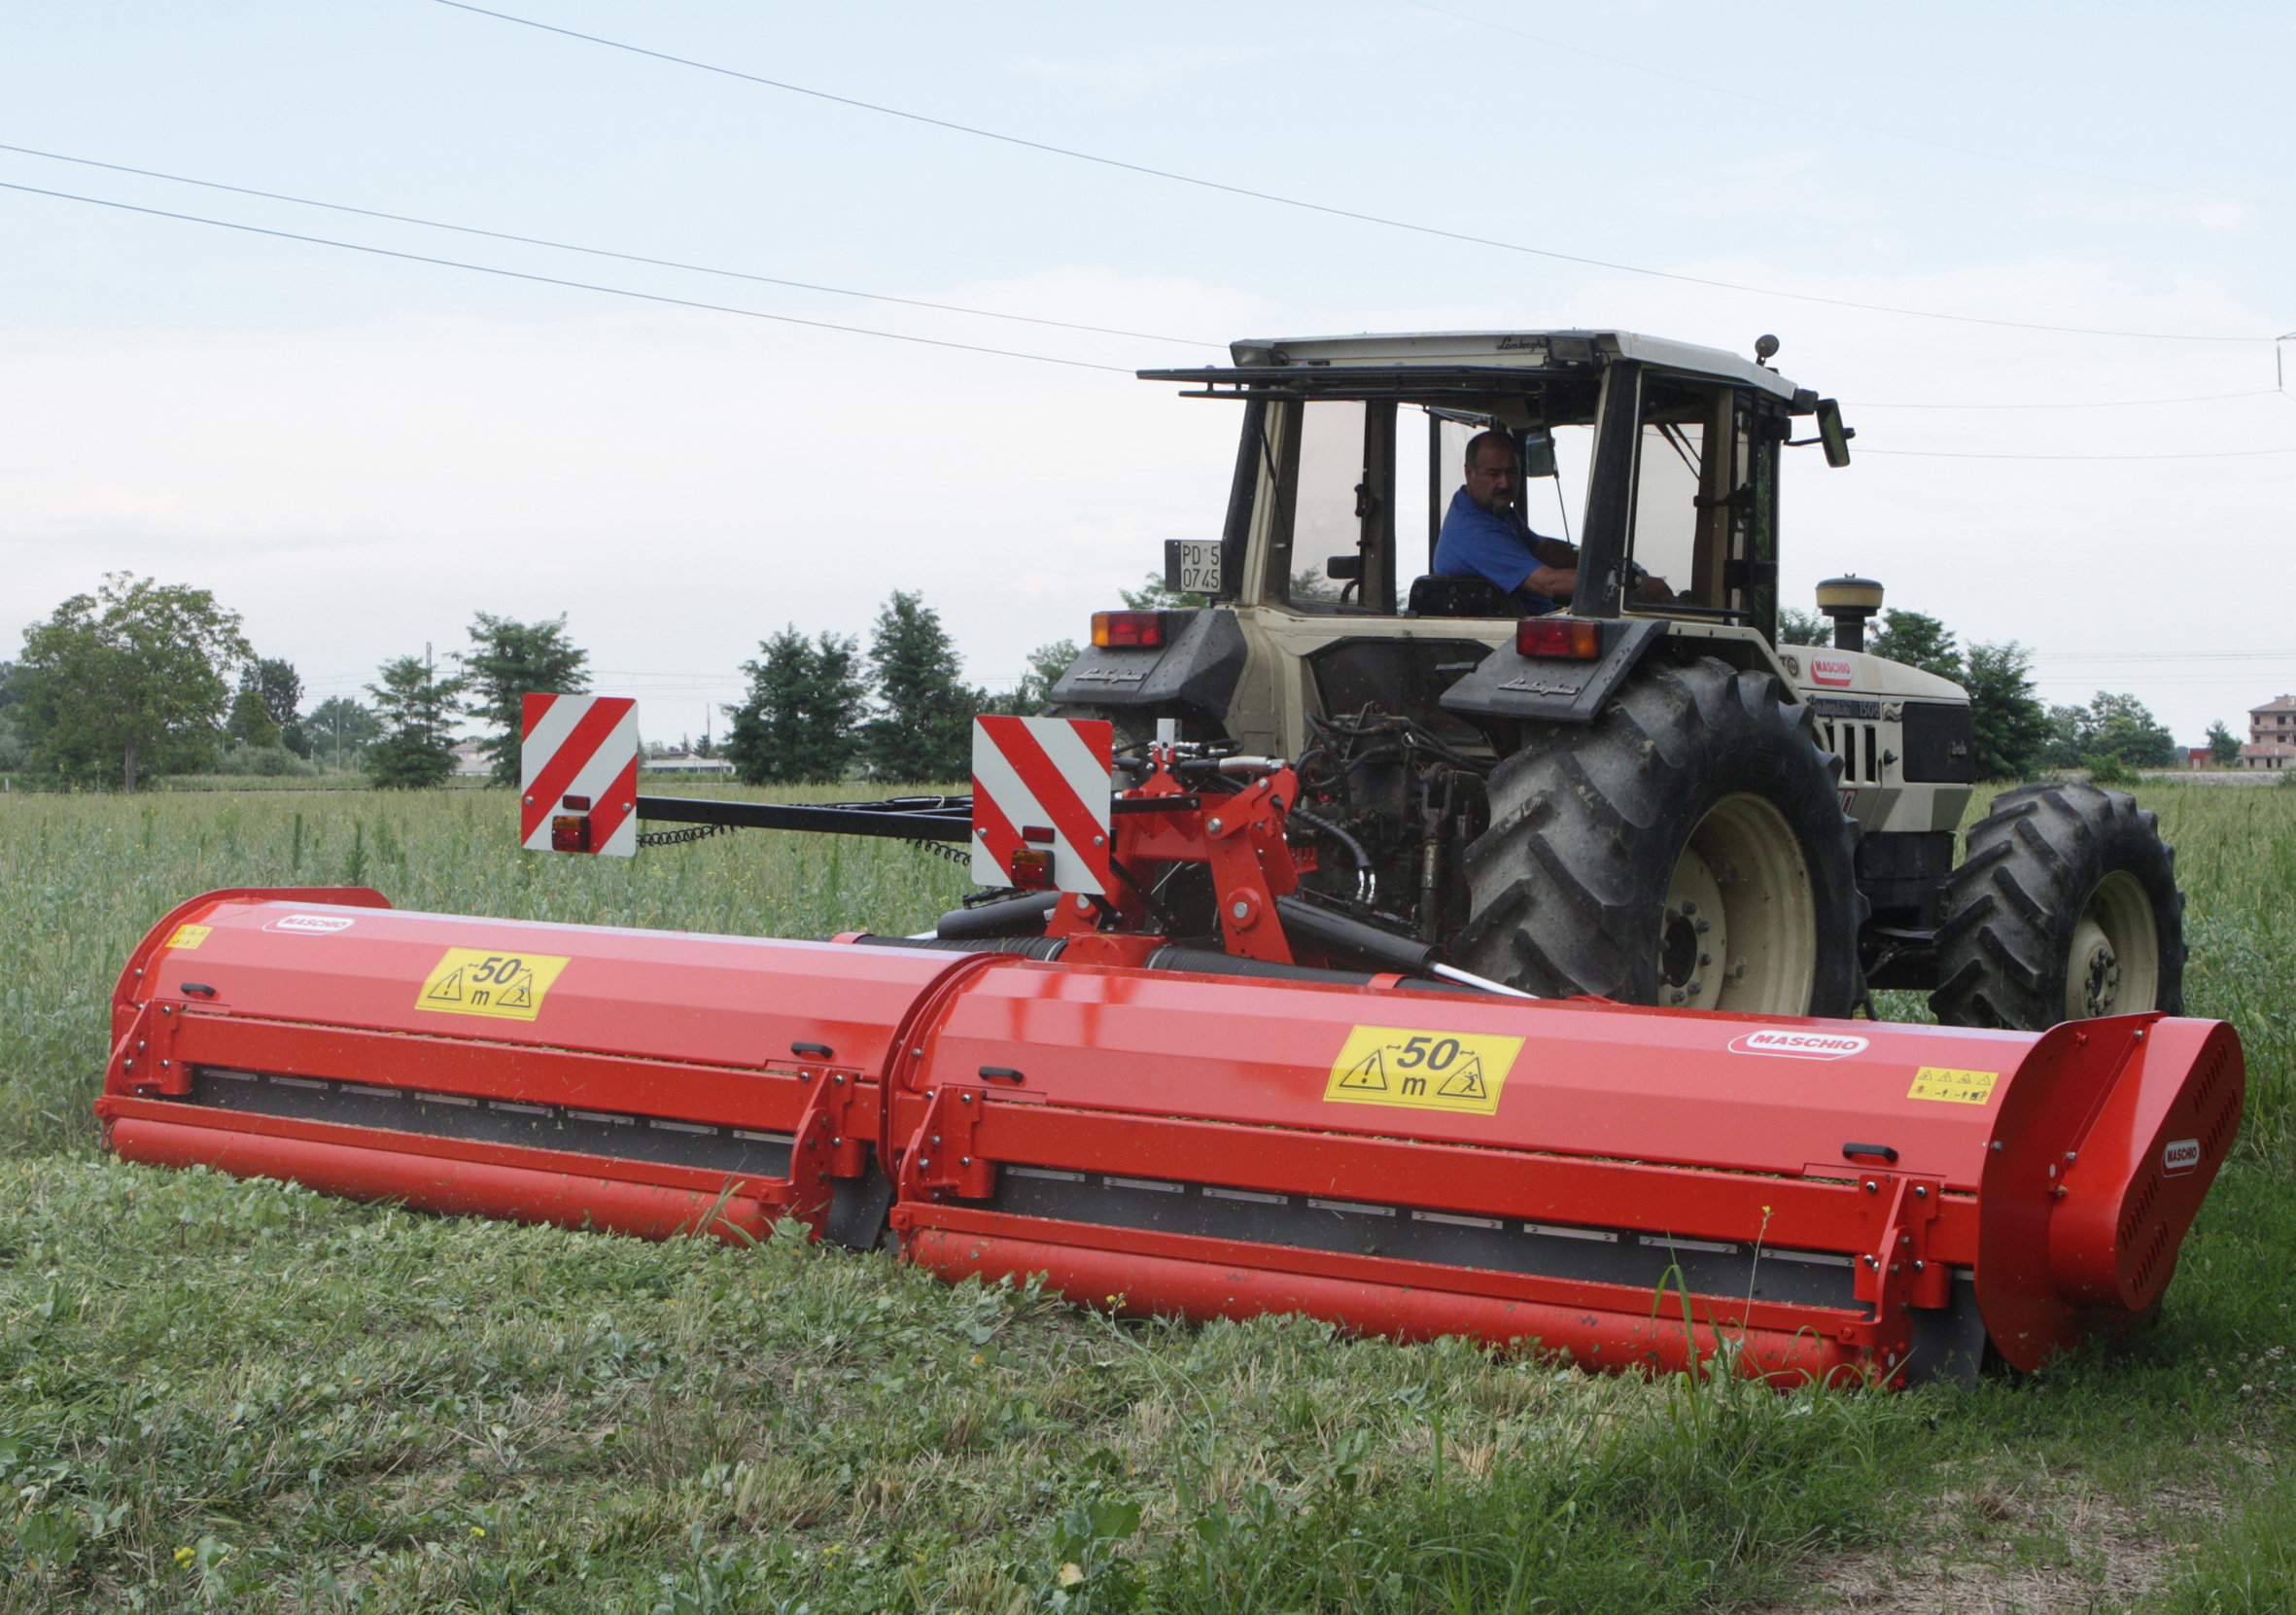 Maschio's new Gemella flail mower in action